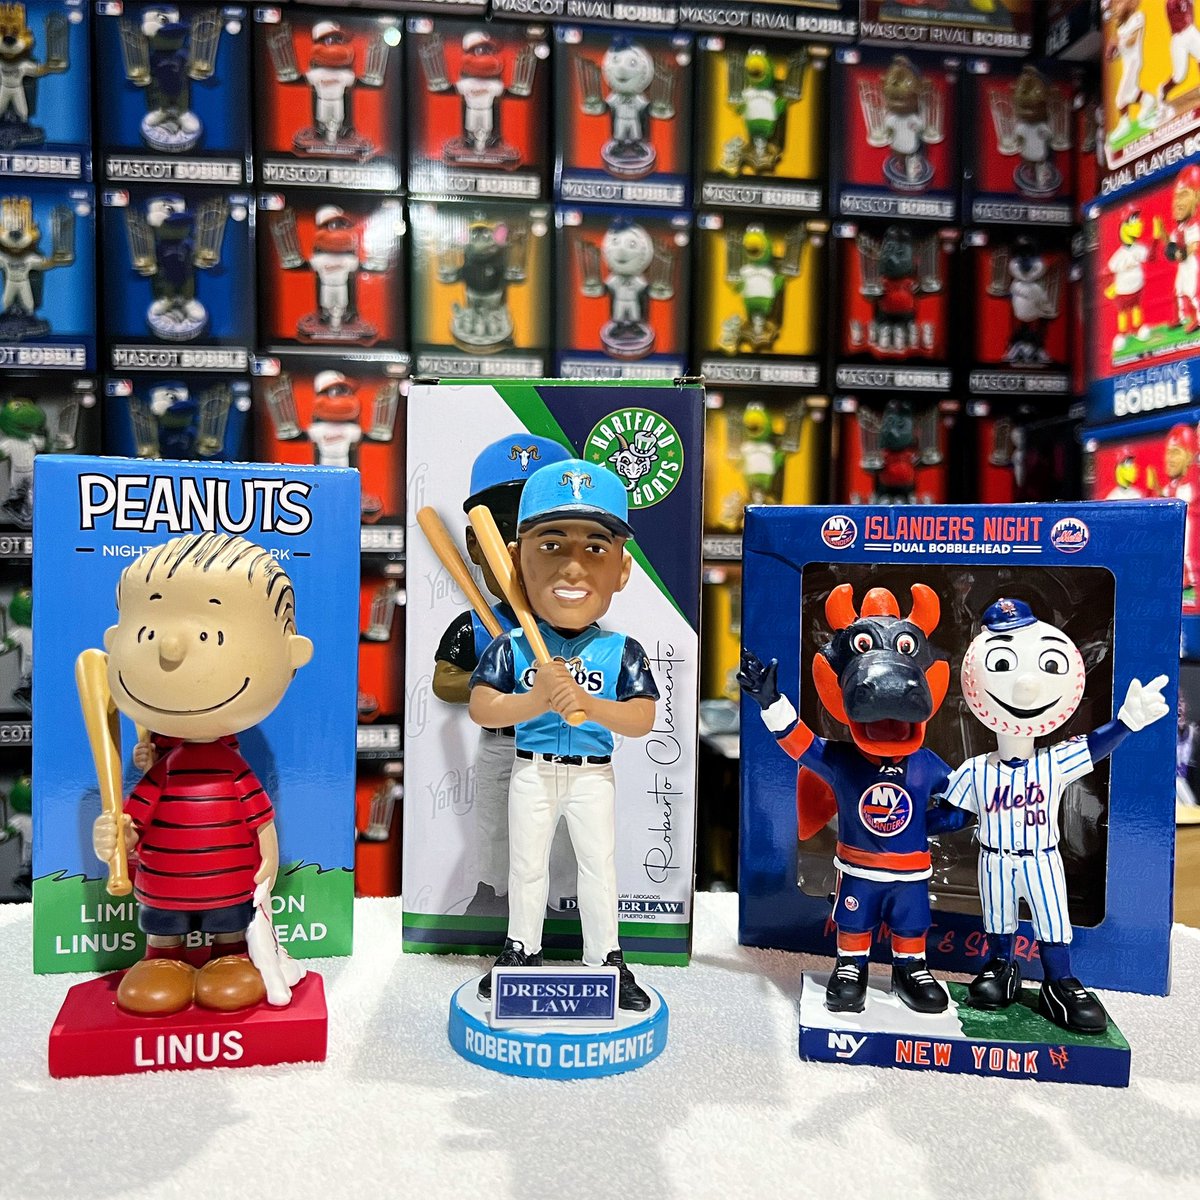 #nationalbobbleheadday Triple Bobblehead Give! Linus Peanuts Fenway Park Special Ticket, Yard Goats Roberto Clemente and Sparky/Mr Met dual Special Ticket bobblehead. 3 winners will be announced tomorrow night. All you have to do is RT
Cross posted on multiple outlets.